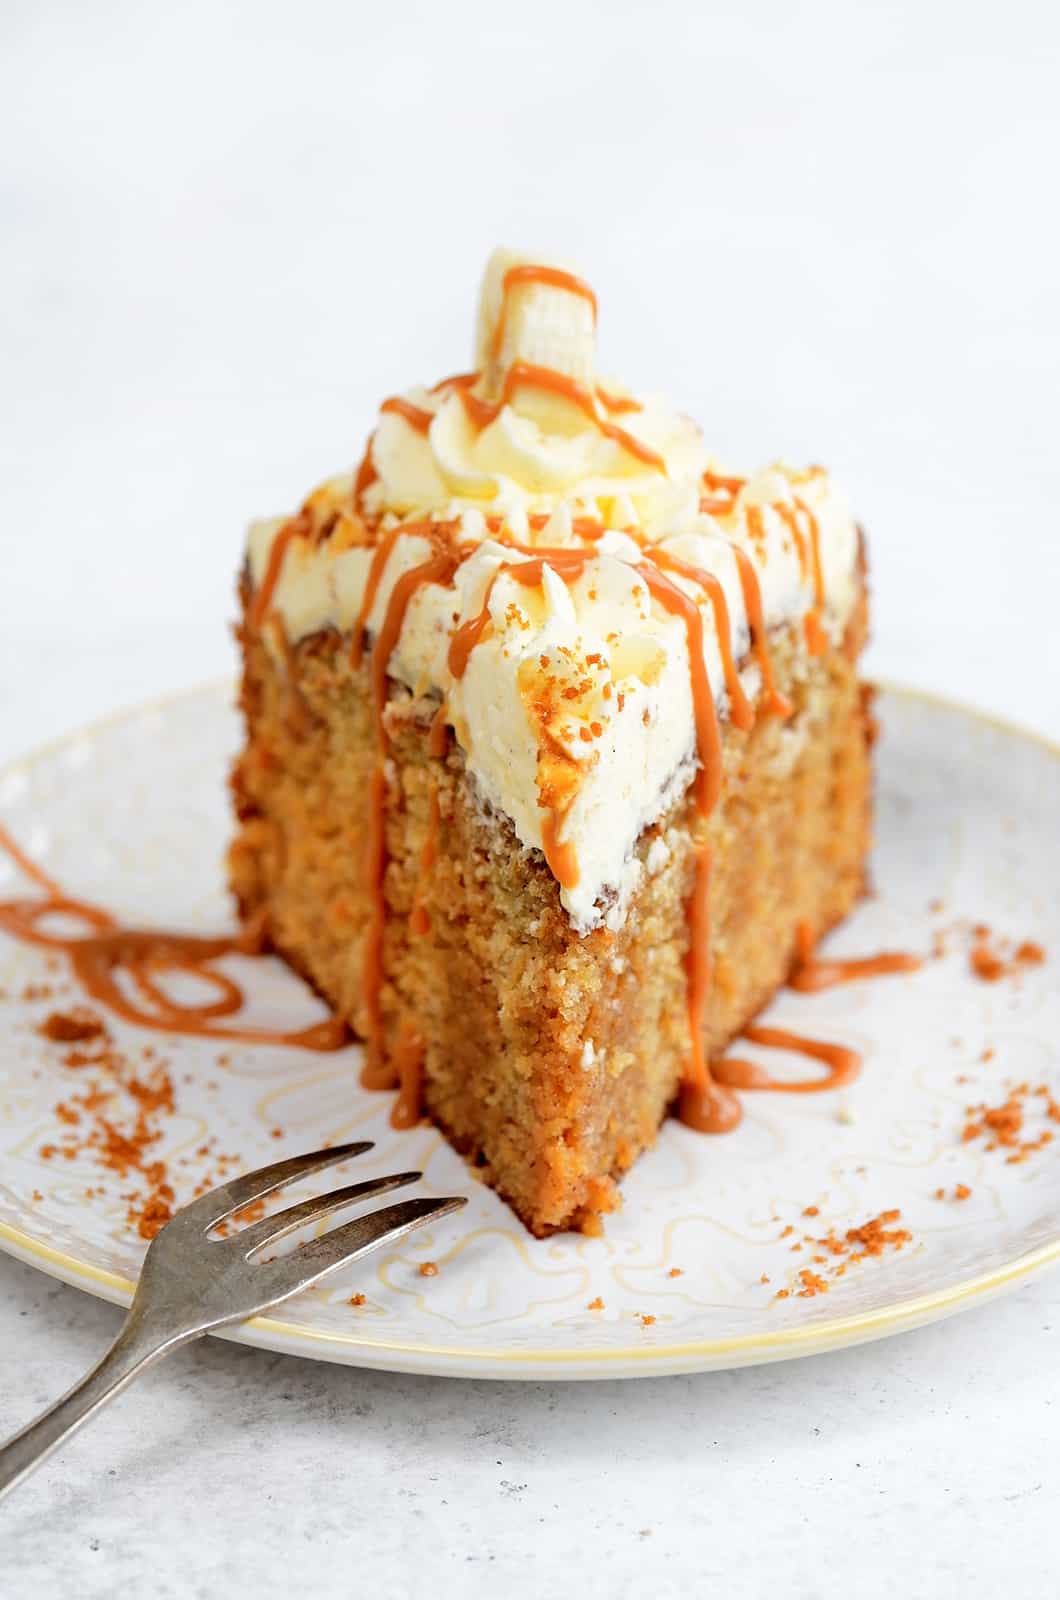 Slice of Banoffee Cake topped with whipped cream and drizzled with caramel